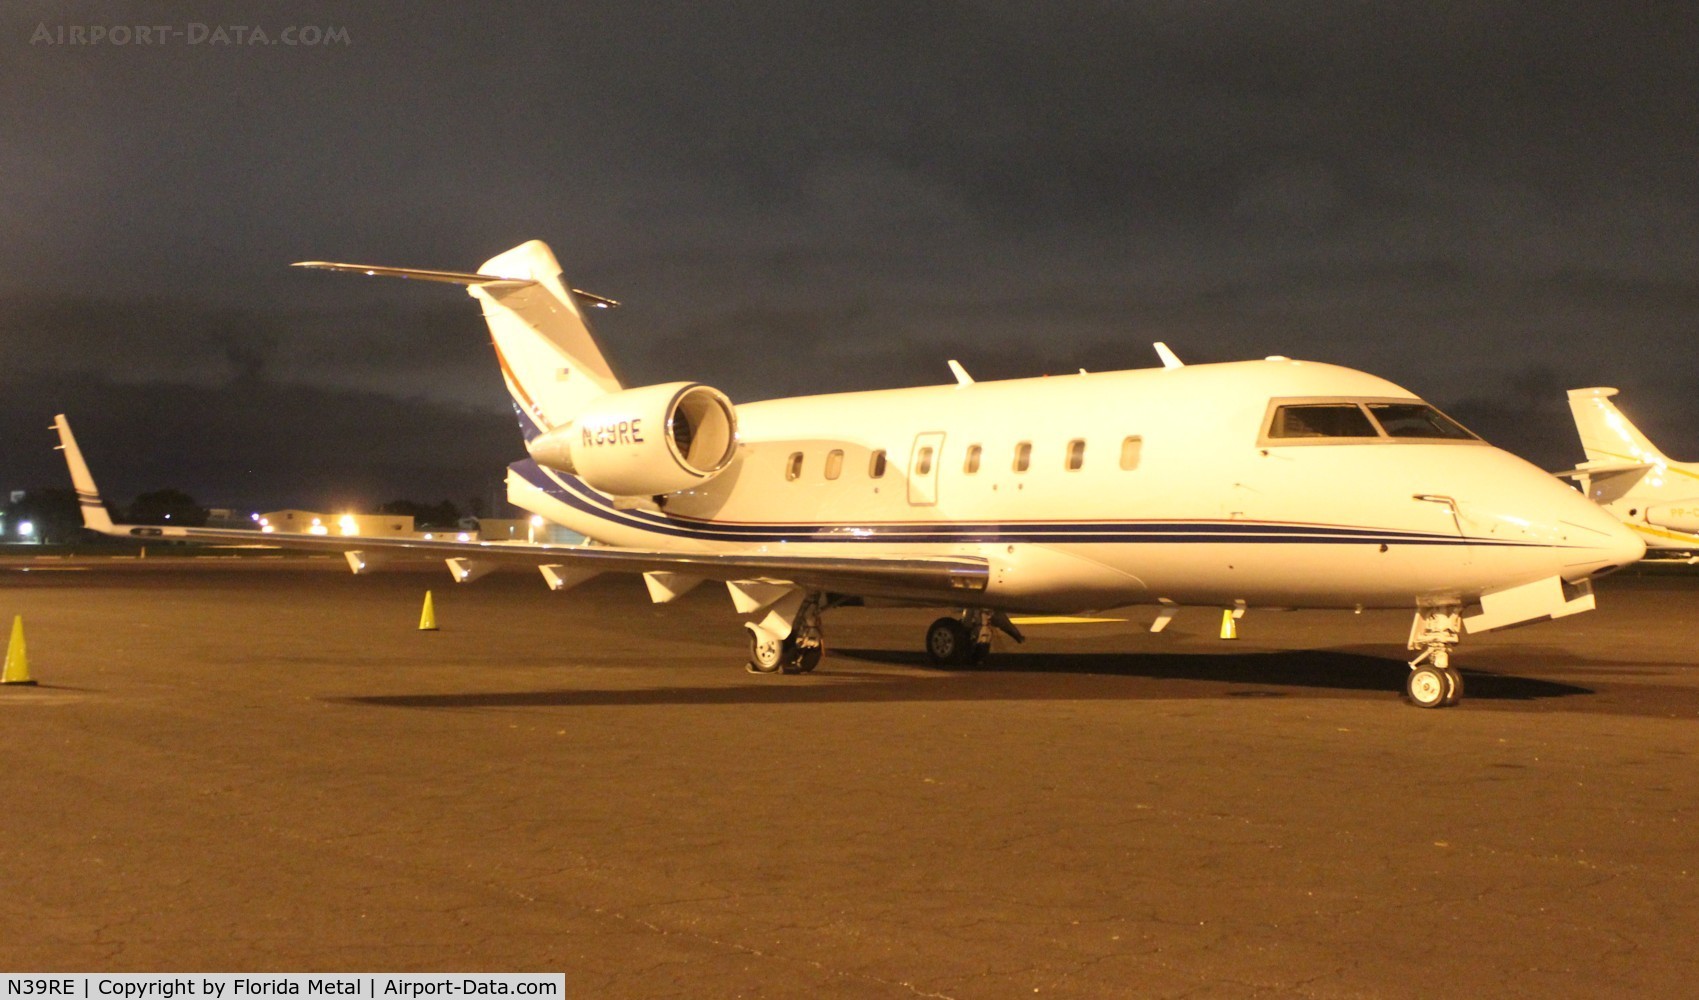 N39RE, 1999 Bombardier Challenger 604 (CL-600-2B16) C/N 5420, Challenger 601